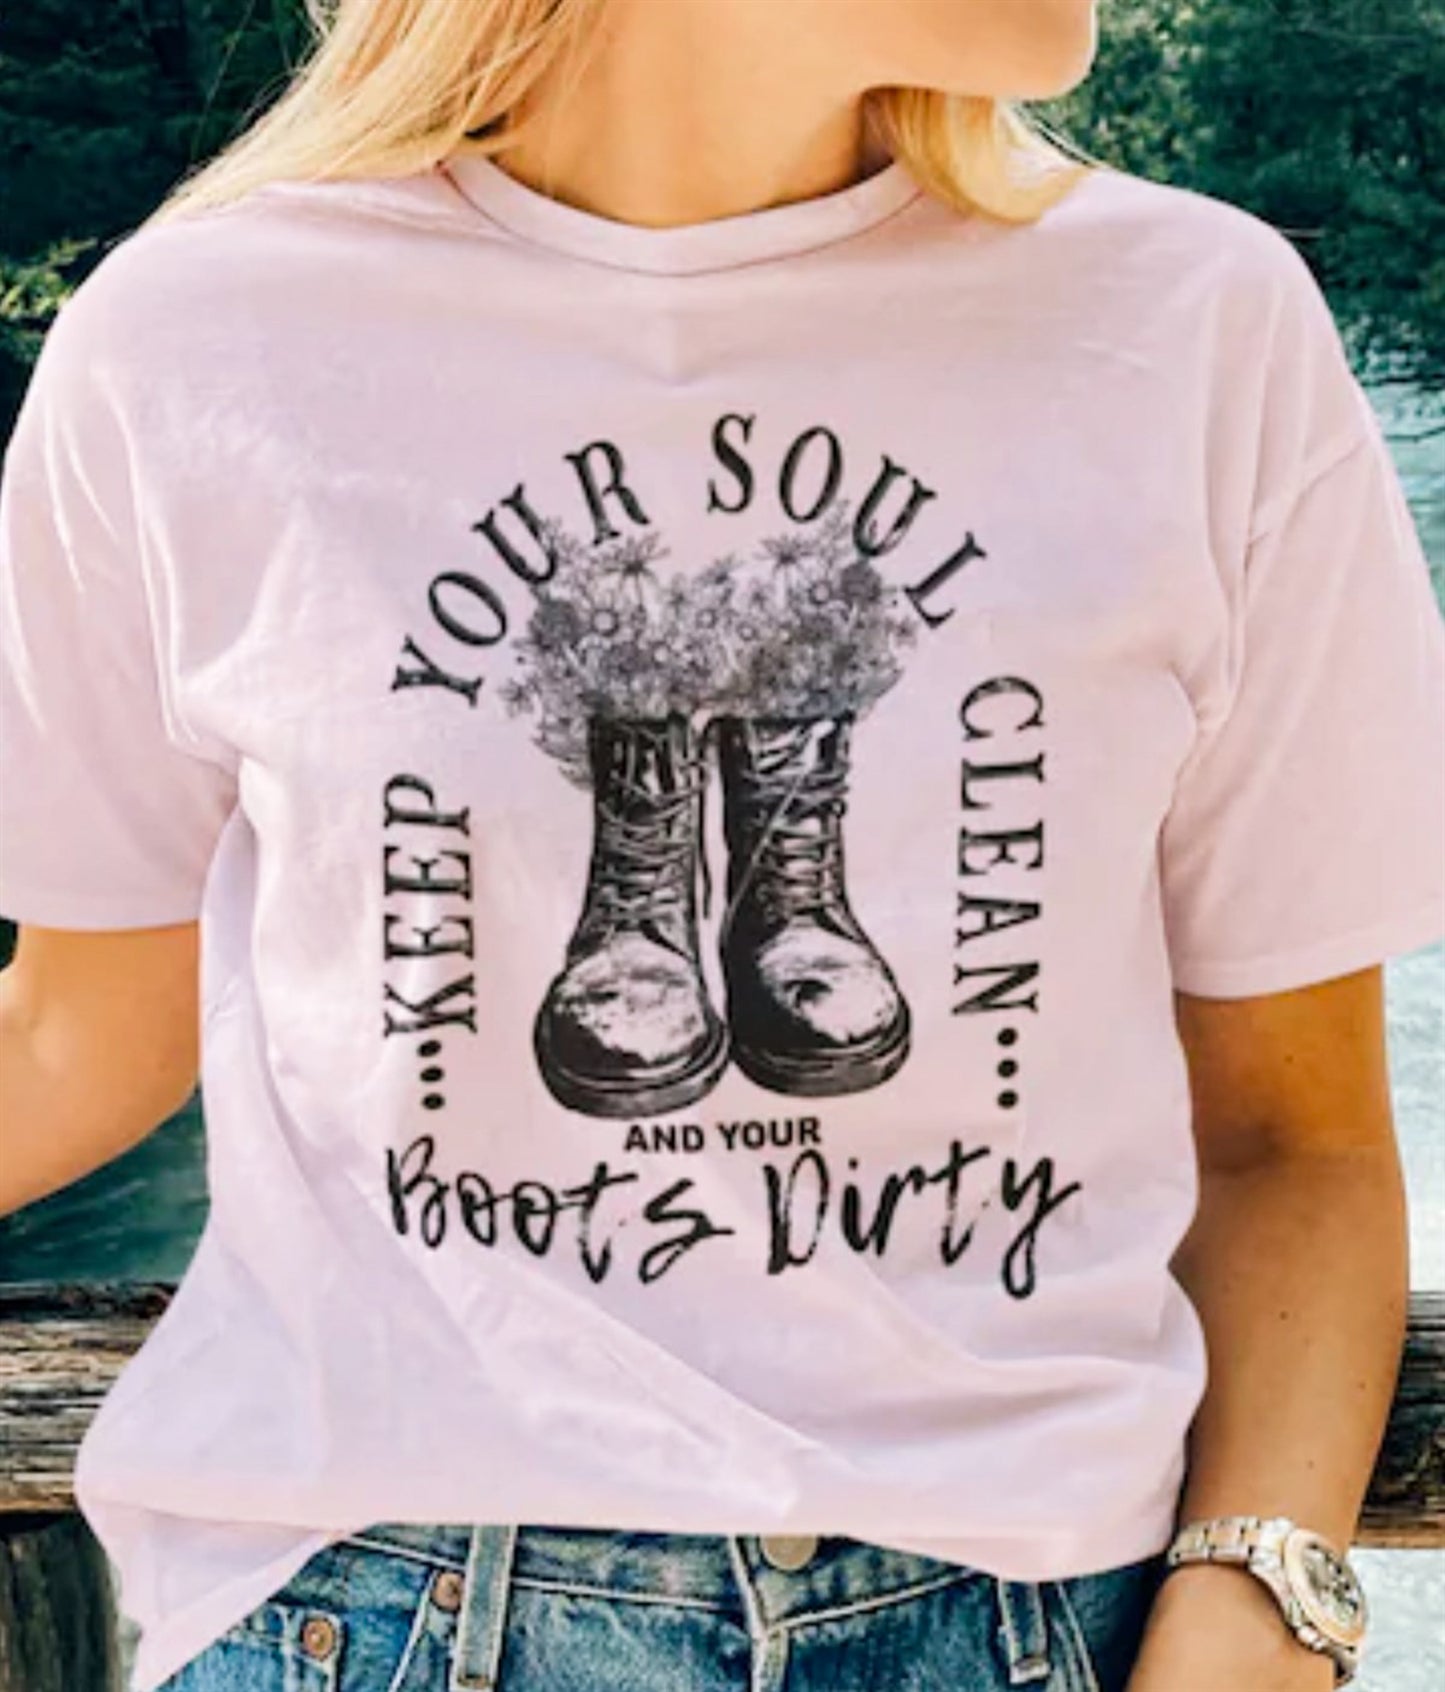 Keep Your Soul Clean & Your Boots Dirty Tee